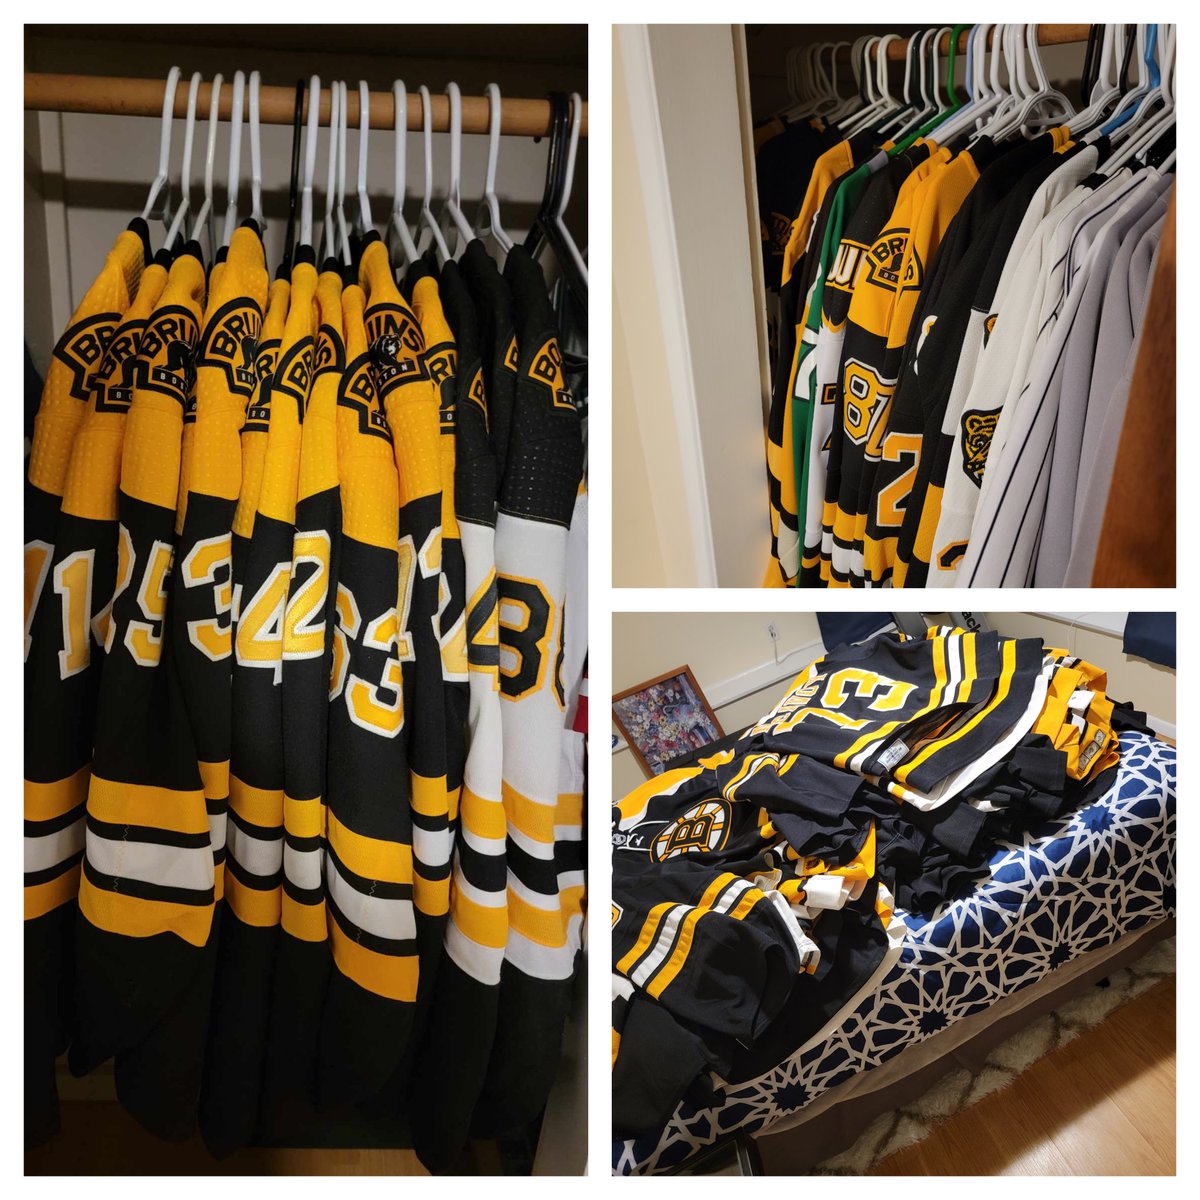 Running out of room with this ever growing collection. Let's Go @NHLBruins 
#JerseyCollection
#BostonsTeamSince1924 
#NHLBruins